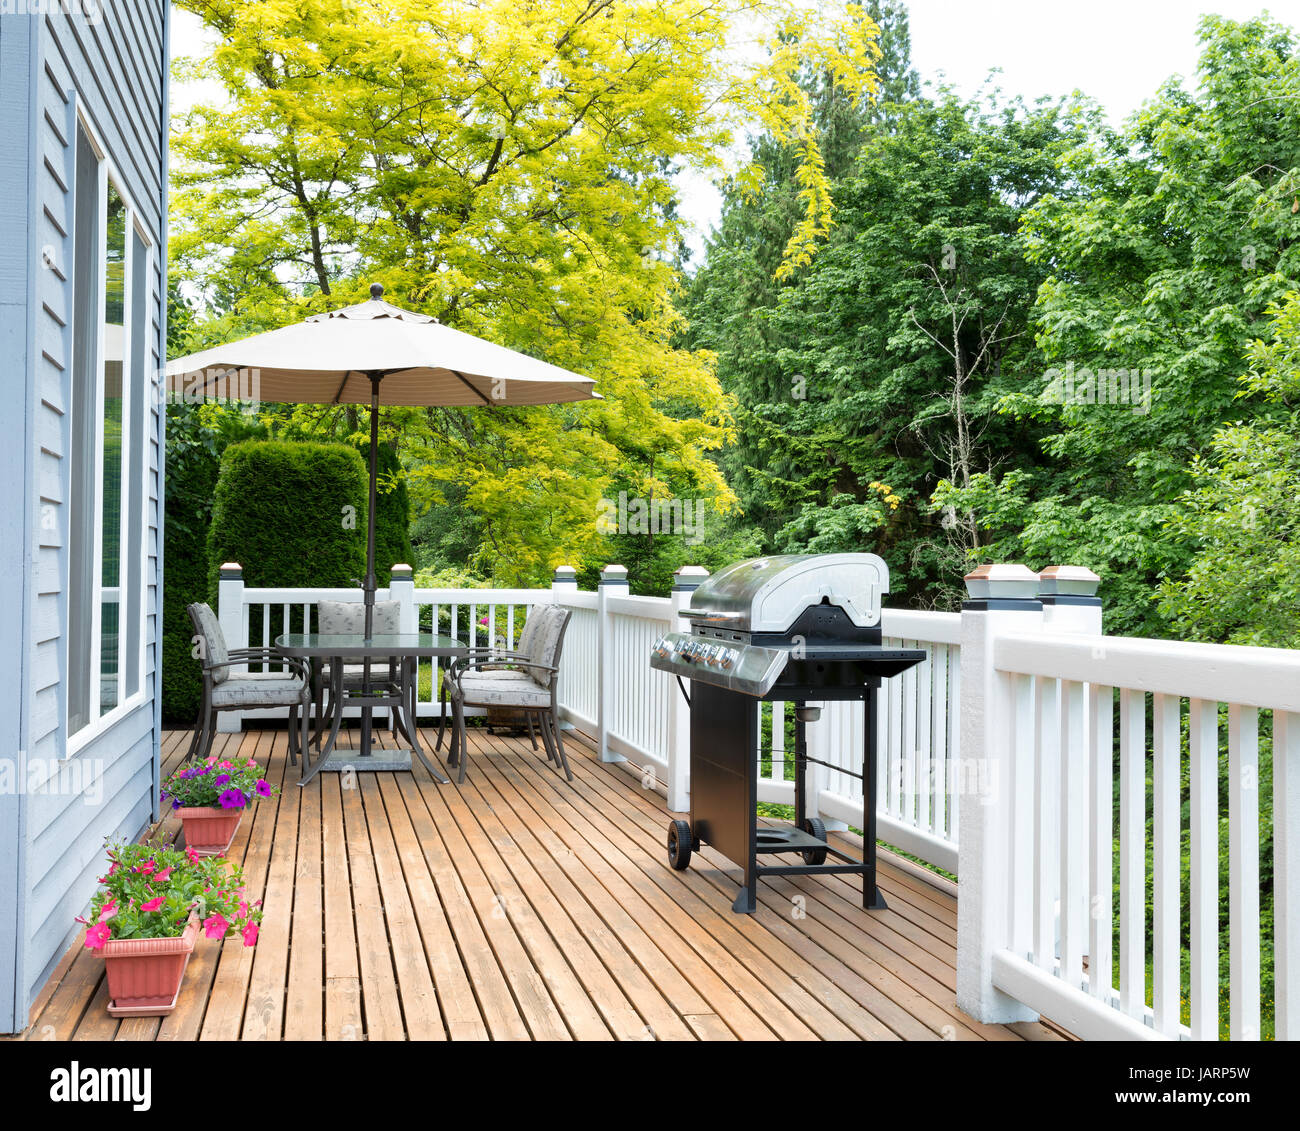 Clean outdoor cedar wooden deck and patio of home during daytime Stock Photo